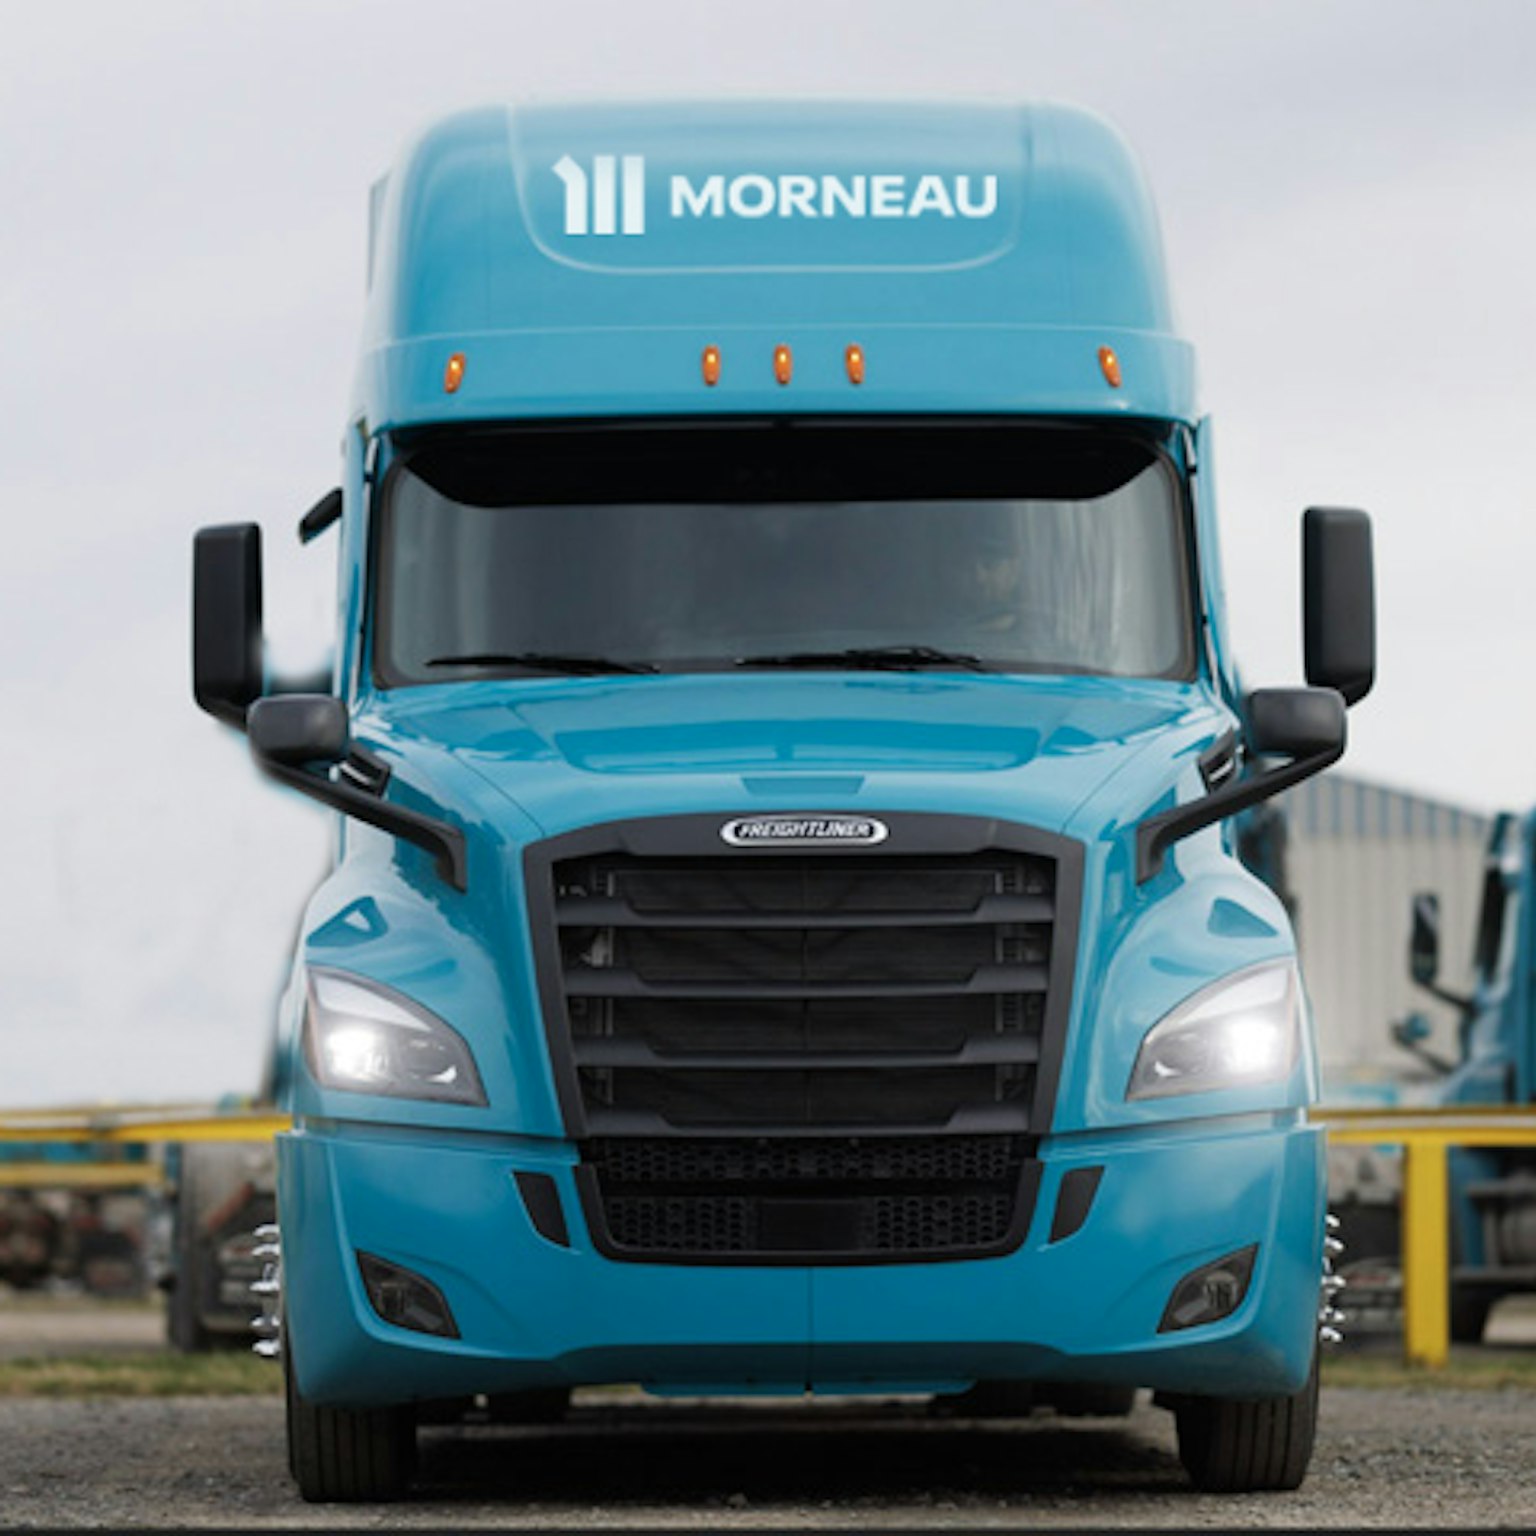 A truck from the Groupe Morneau's fleet